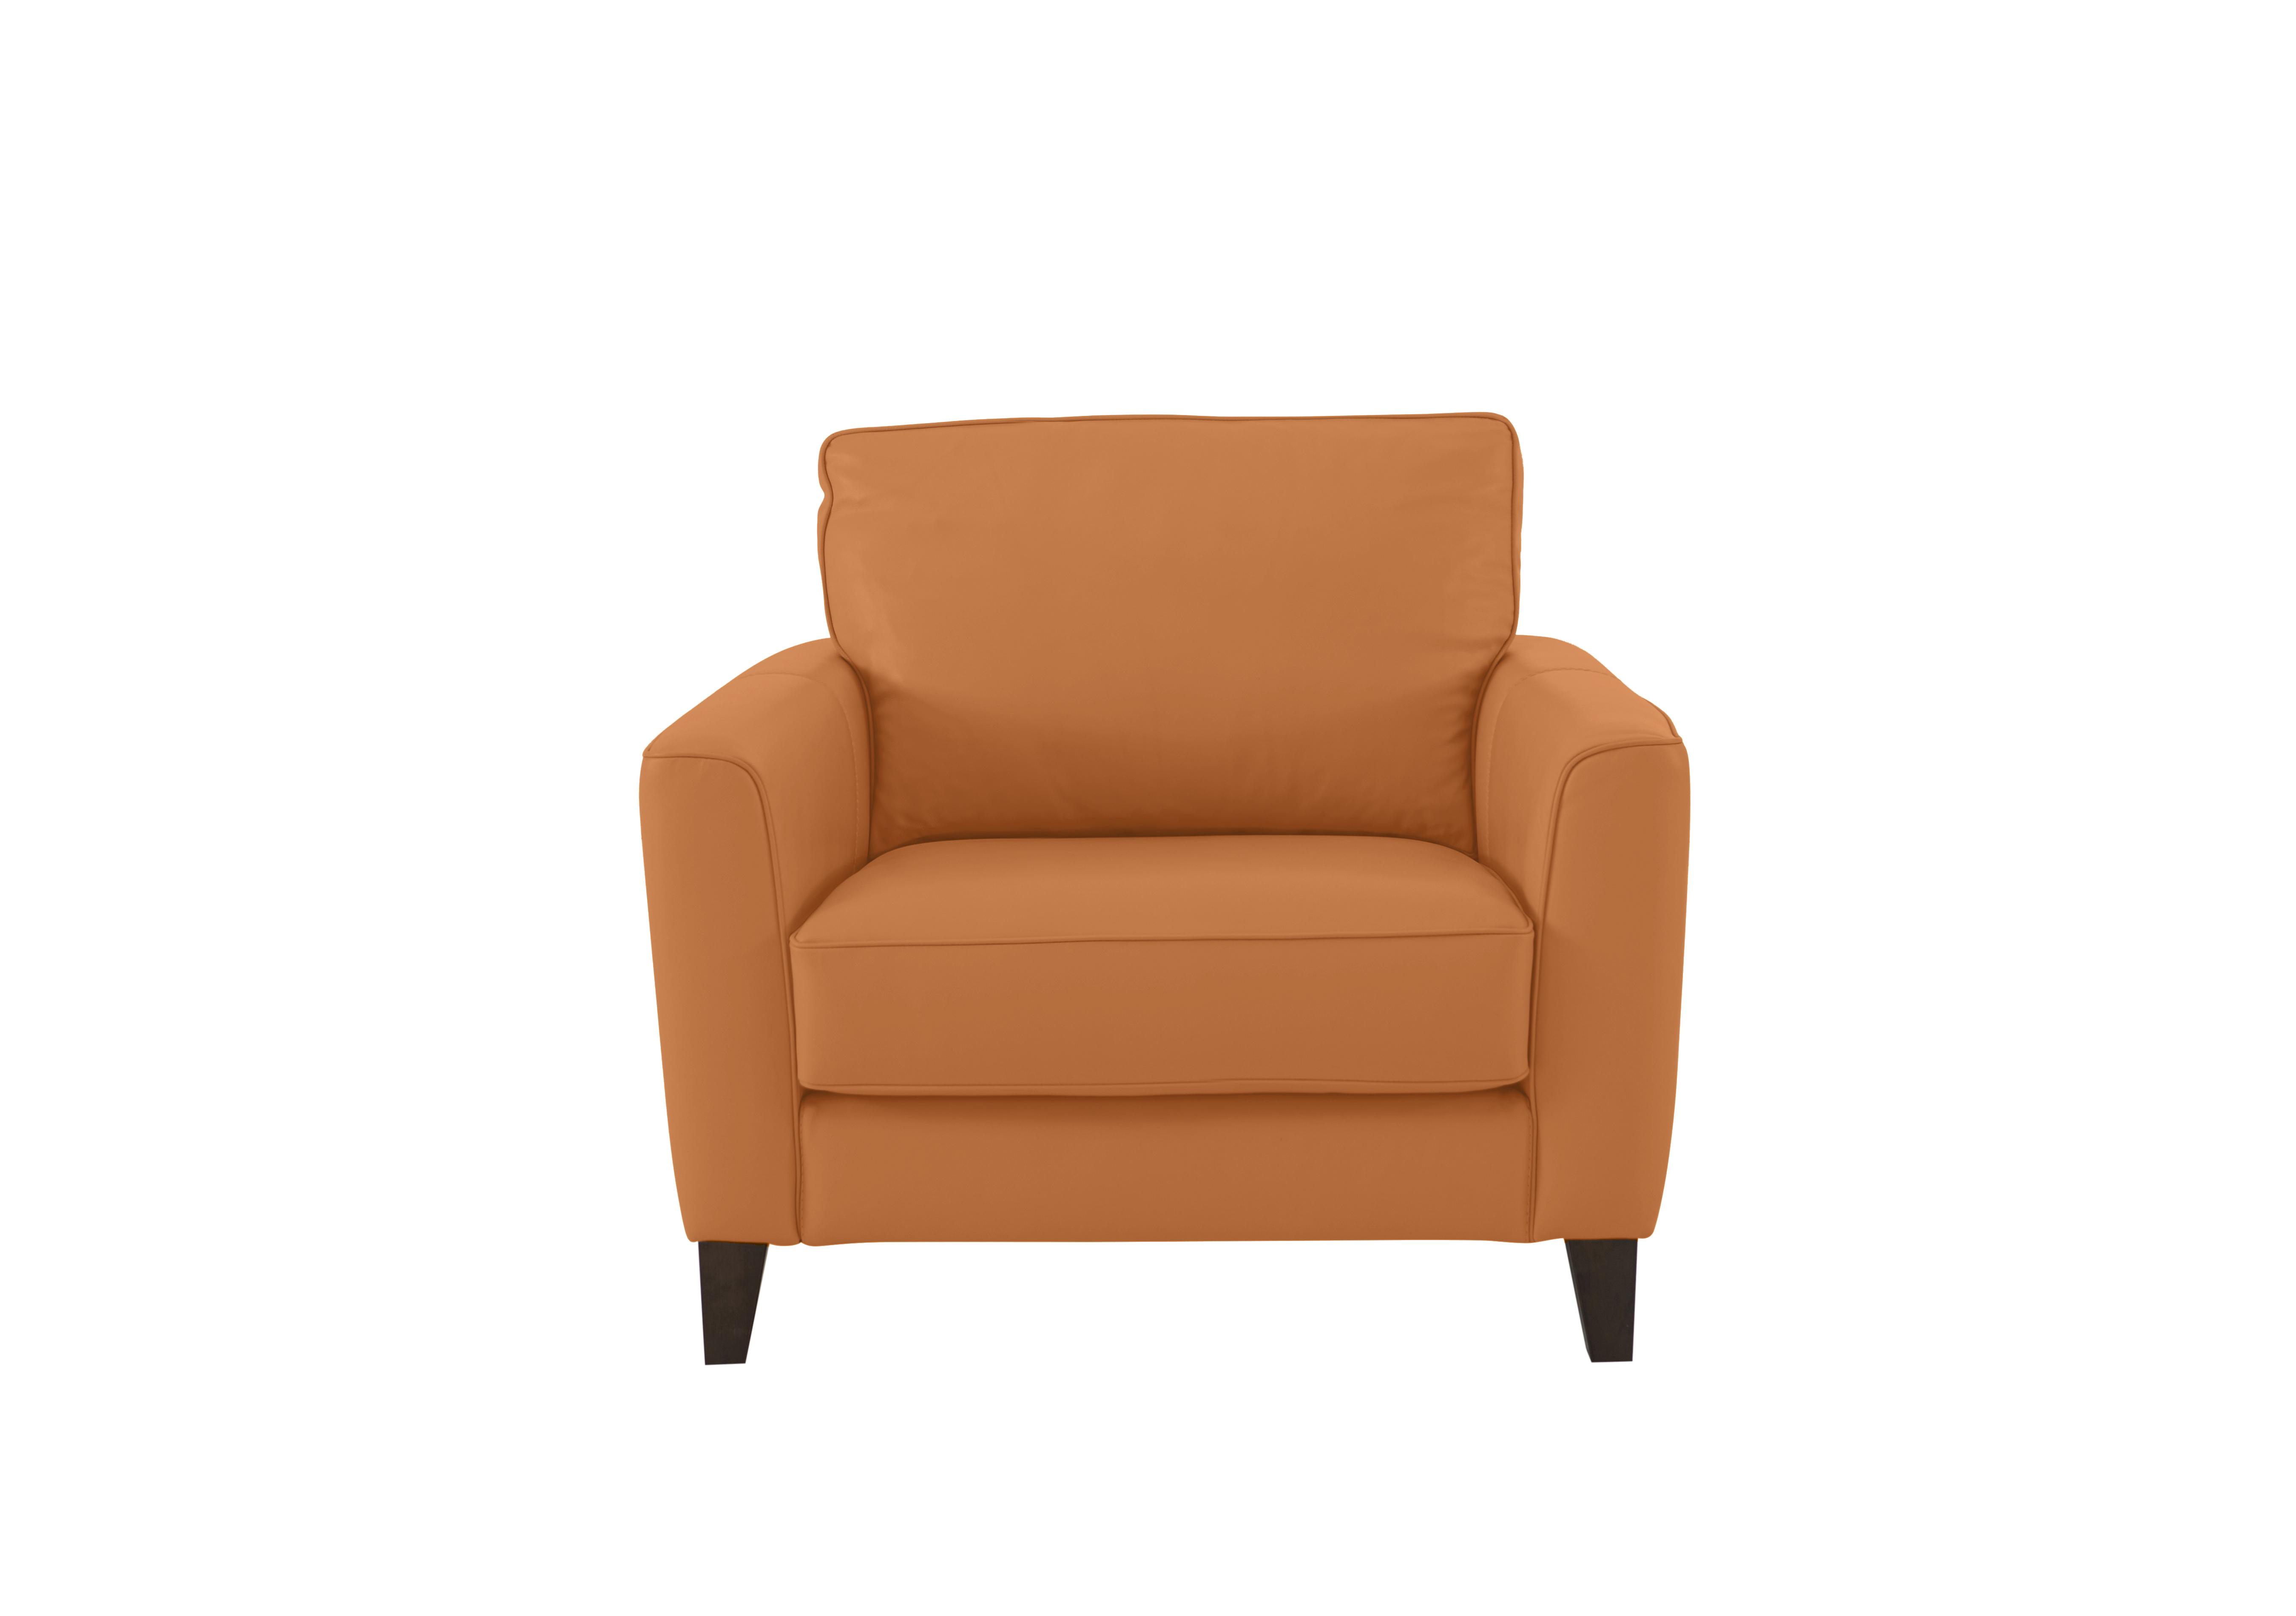 Brondby Leather Armchair in Bv-335e Honey Yellow on Furniture Village